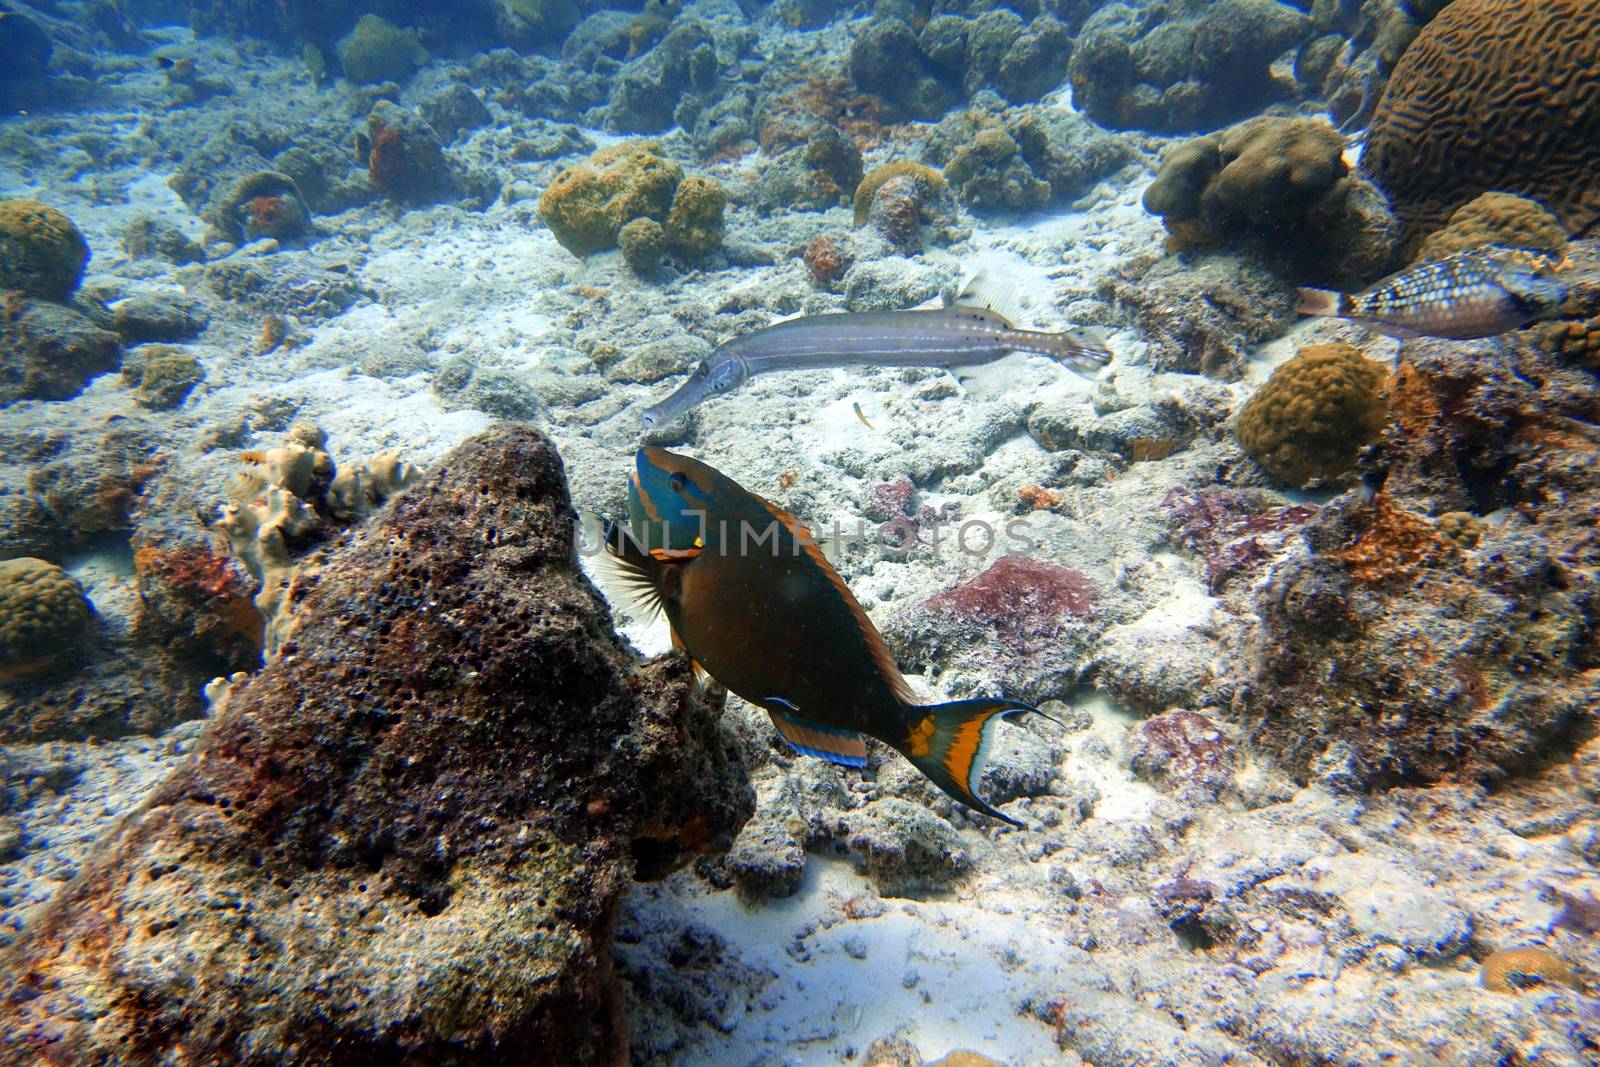 An underwater photo of a Parrotfish swimming around the rock and coral reefs in the ocean.  Parrotfish are a colorful group of marine species (95) found in relatively shallow tropical and subtropical oceans around the world.